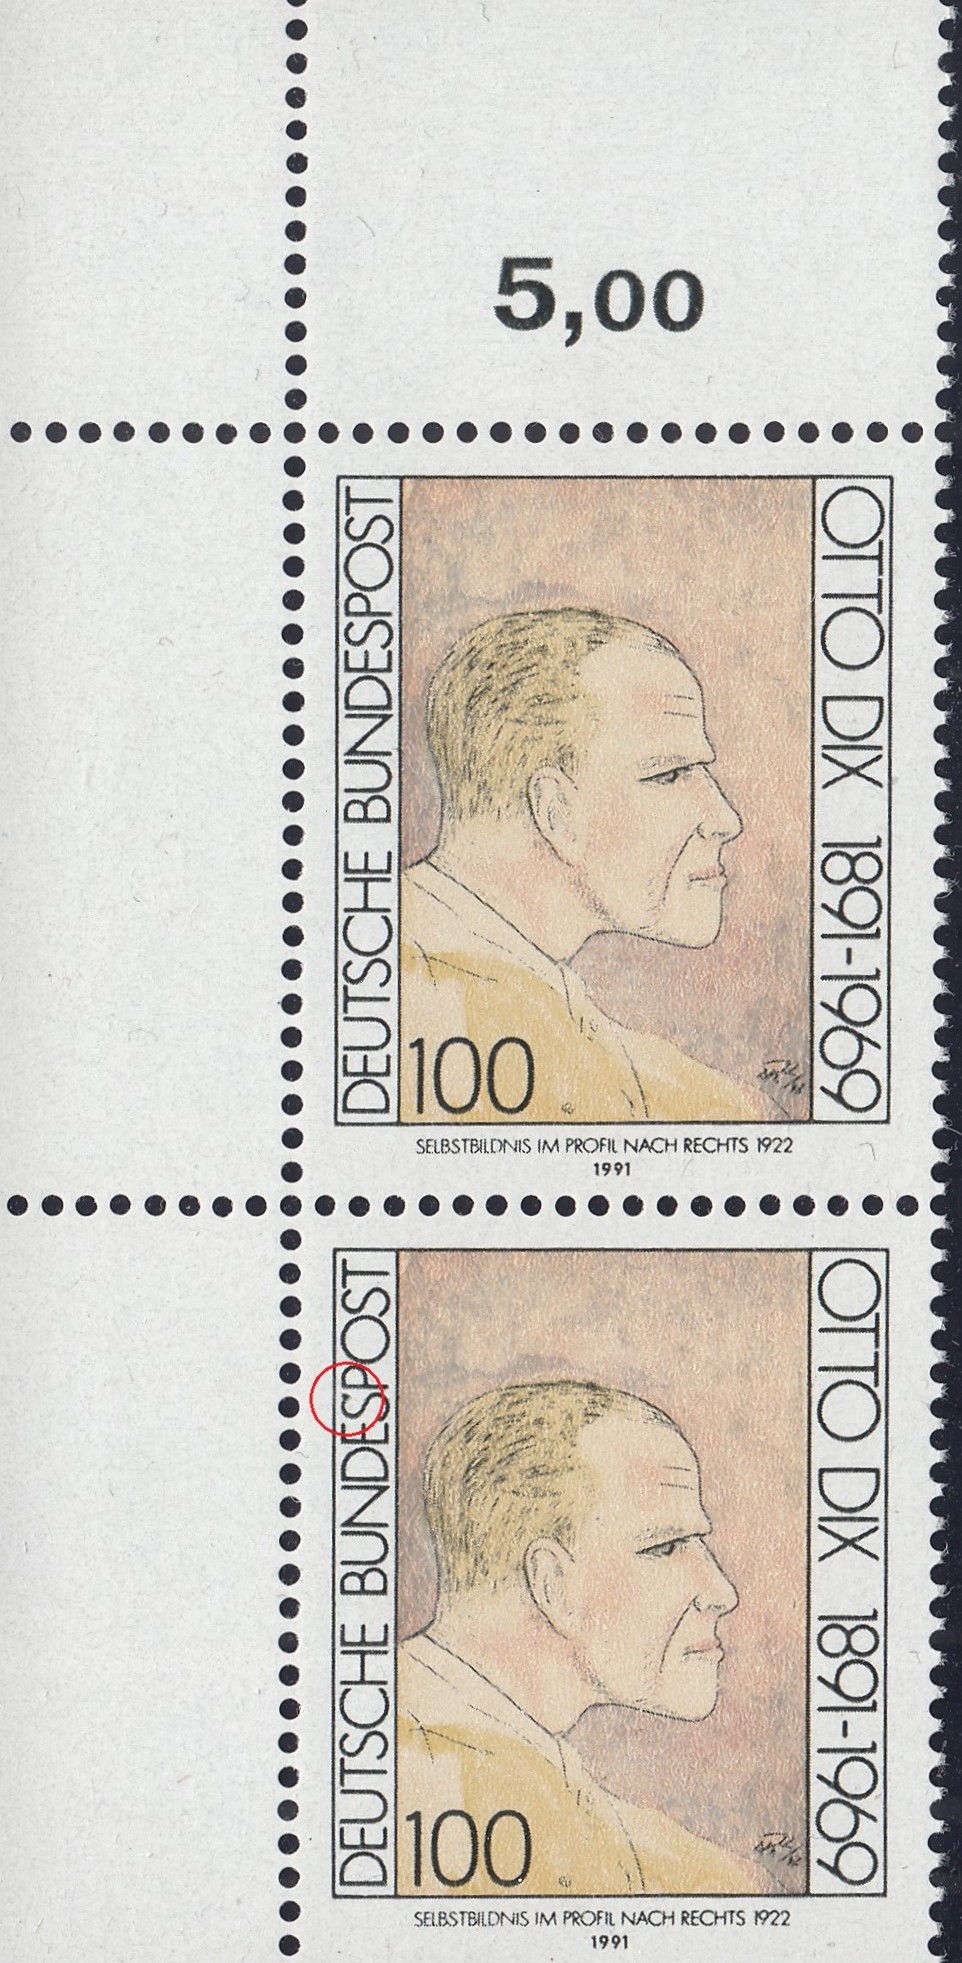 Germany-1991-Dix-postage-stamp-plate-error_f111a – World Stamps Project